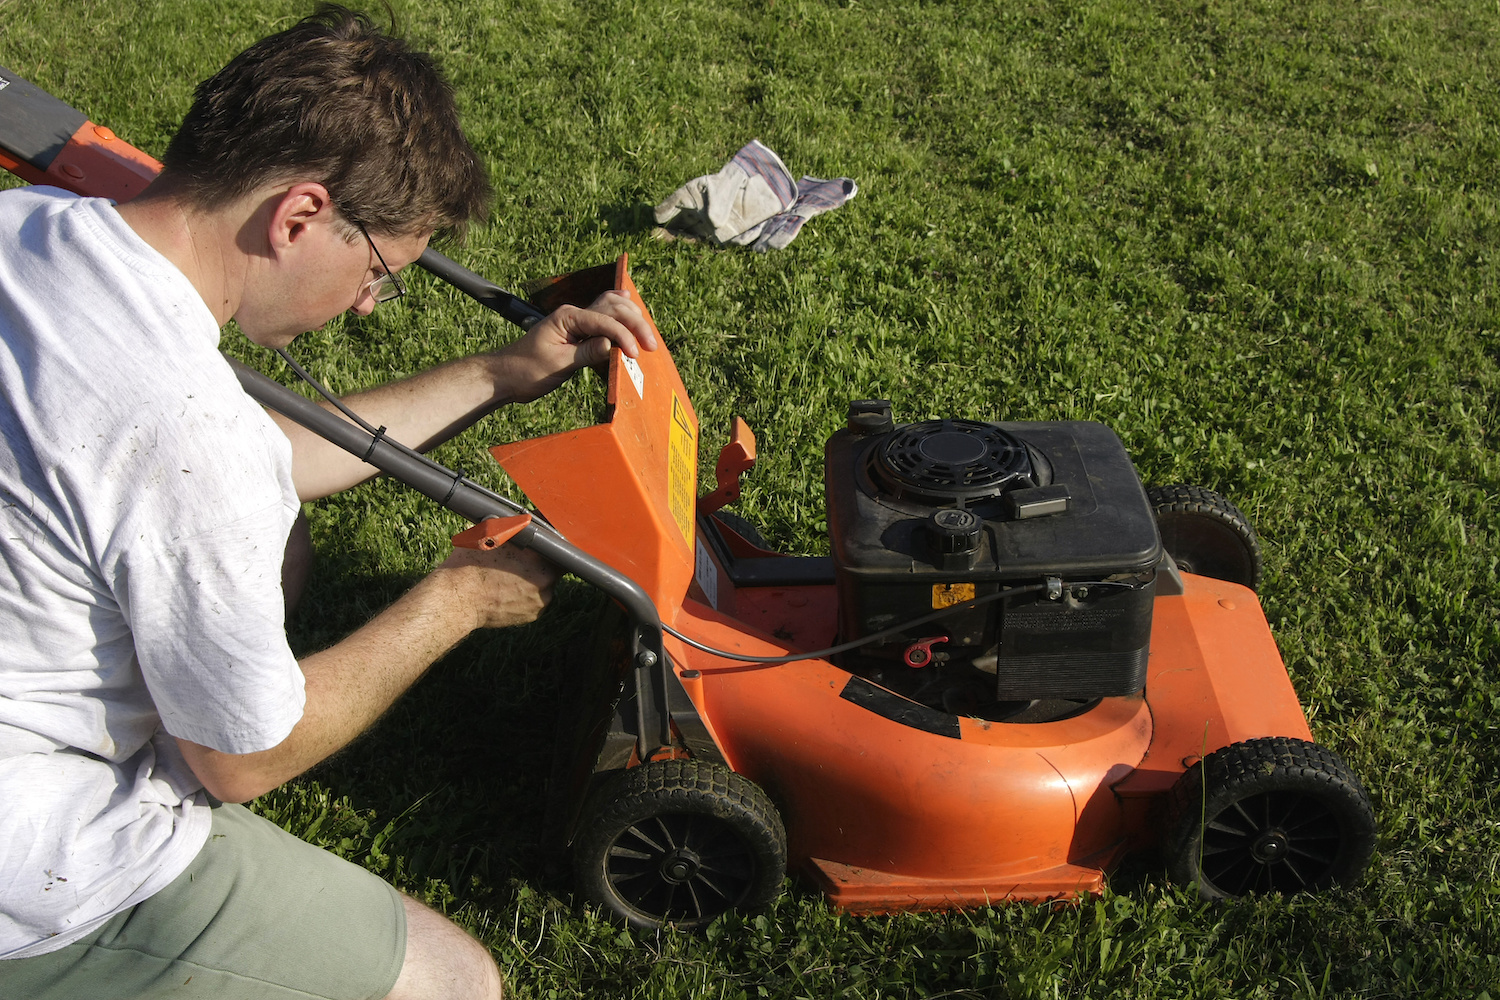 A man performing maintenance on a lawn mower